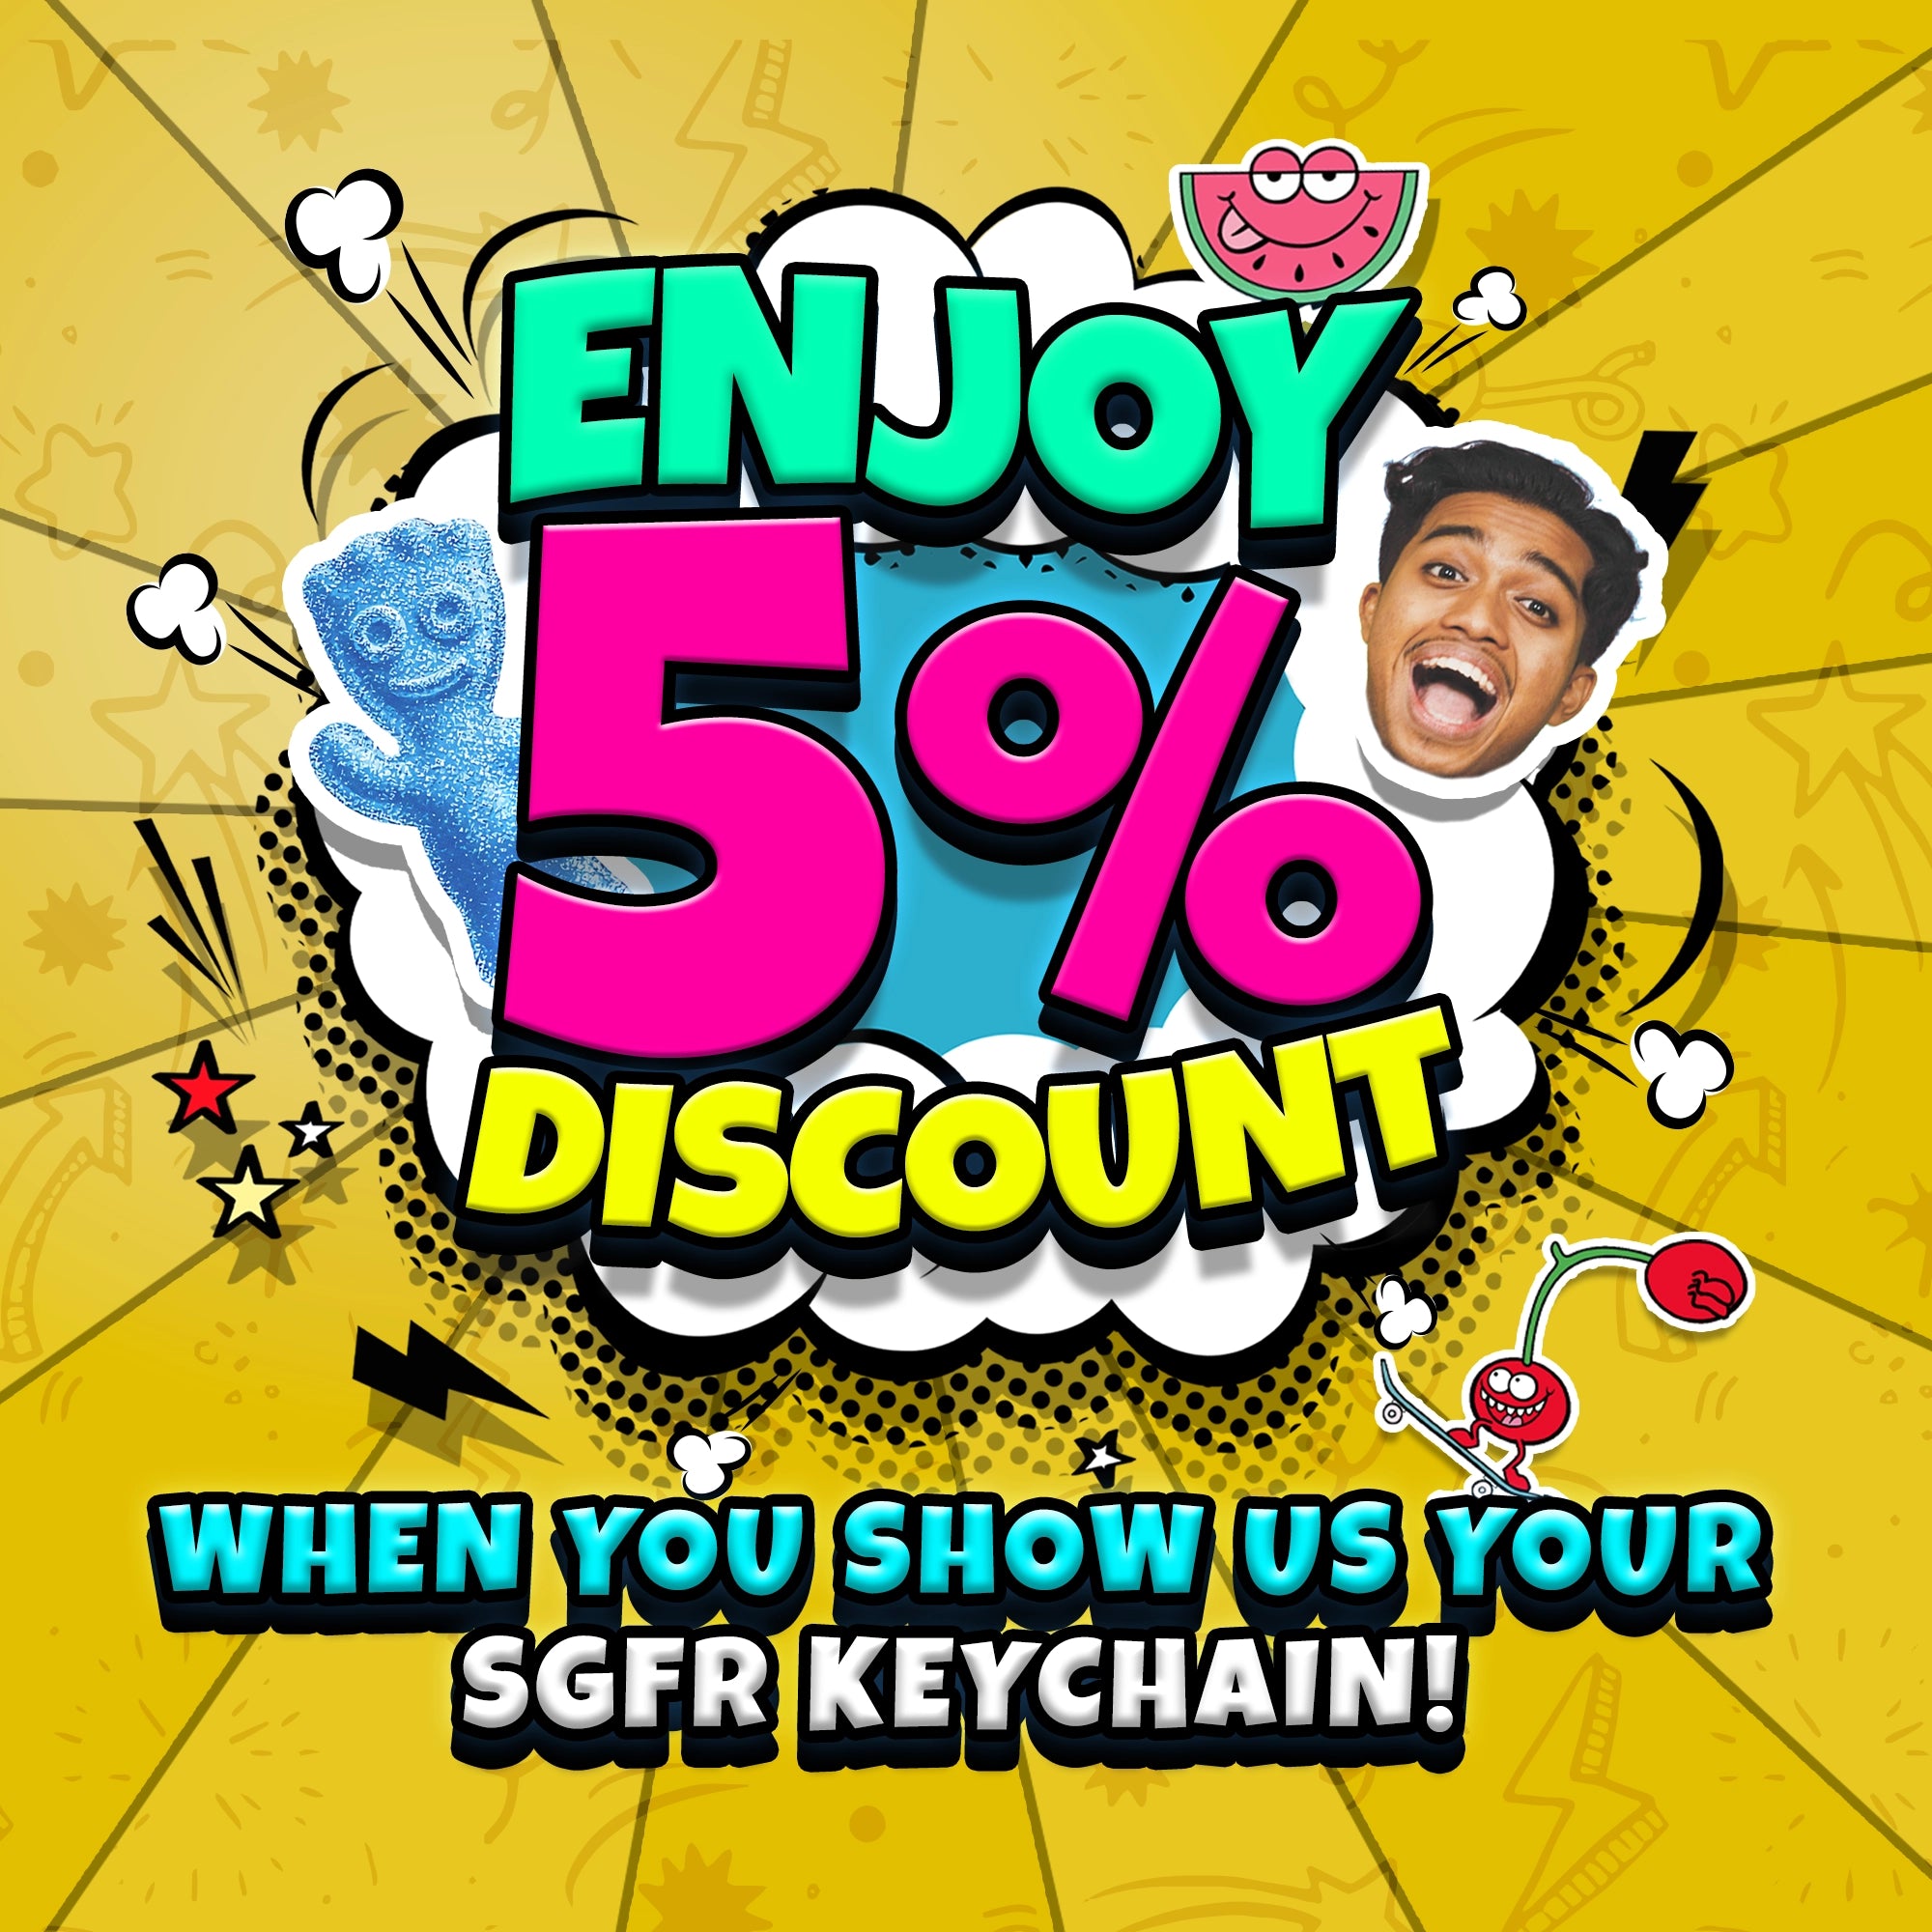 Get 5% Discount When You Show Your SGFR Keychains